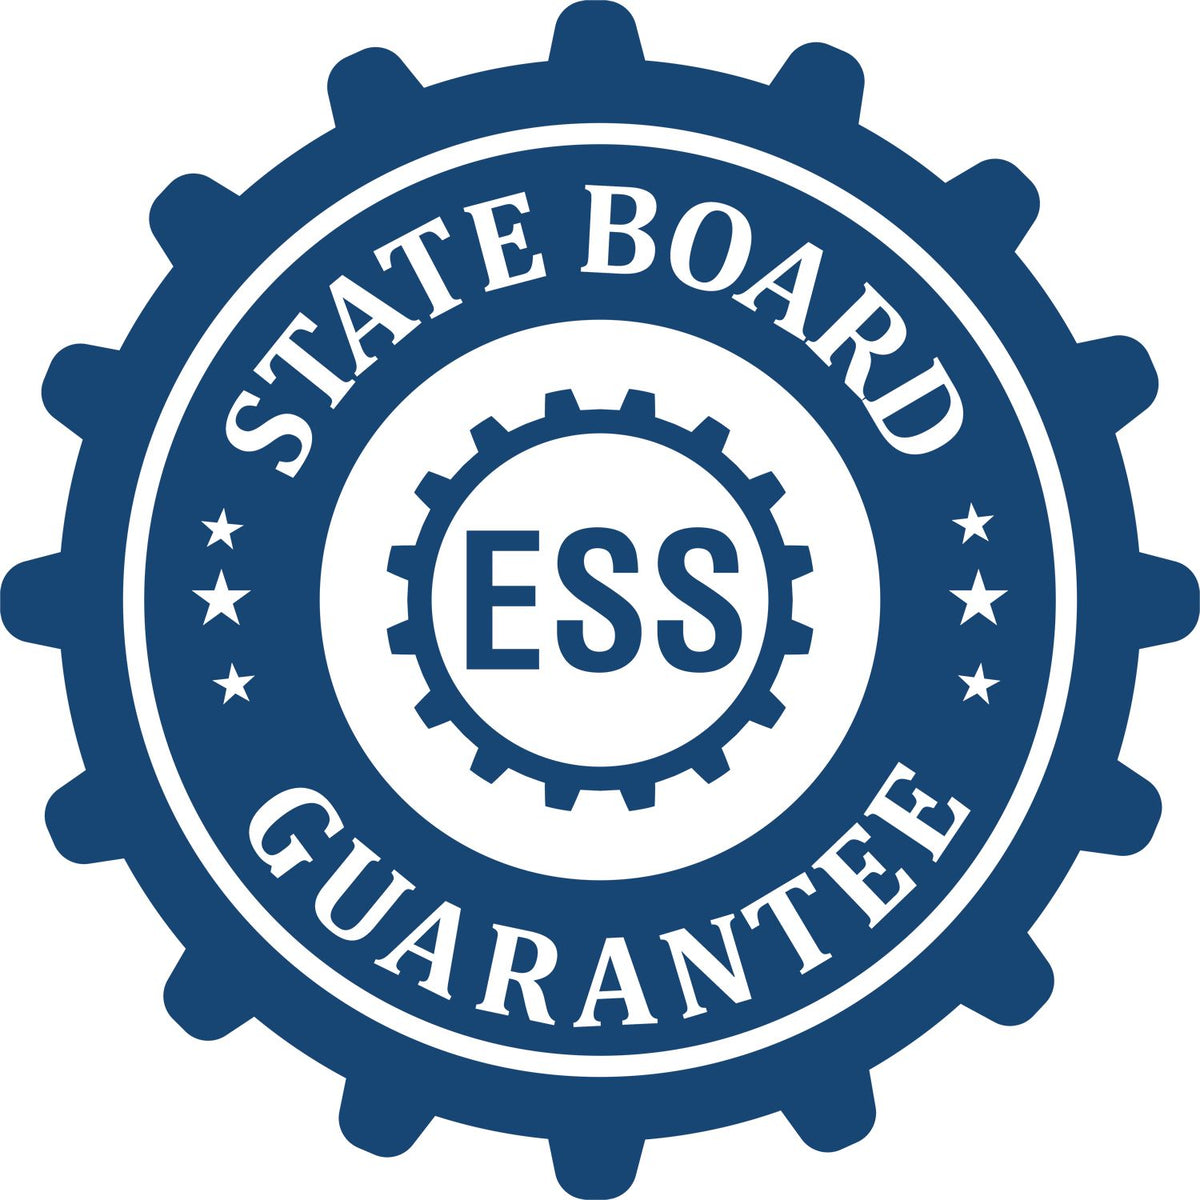 An emblem in a gear shape illustrating a state board guarantee for the Soft Alabama Professional Engineer Seal product.